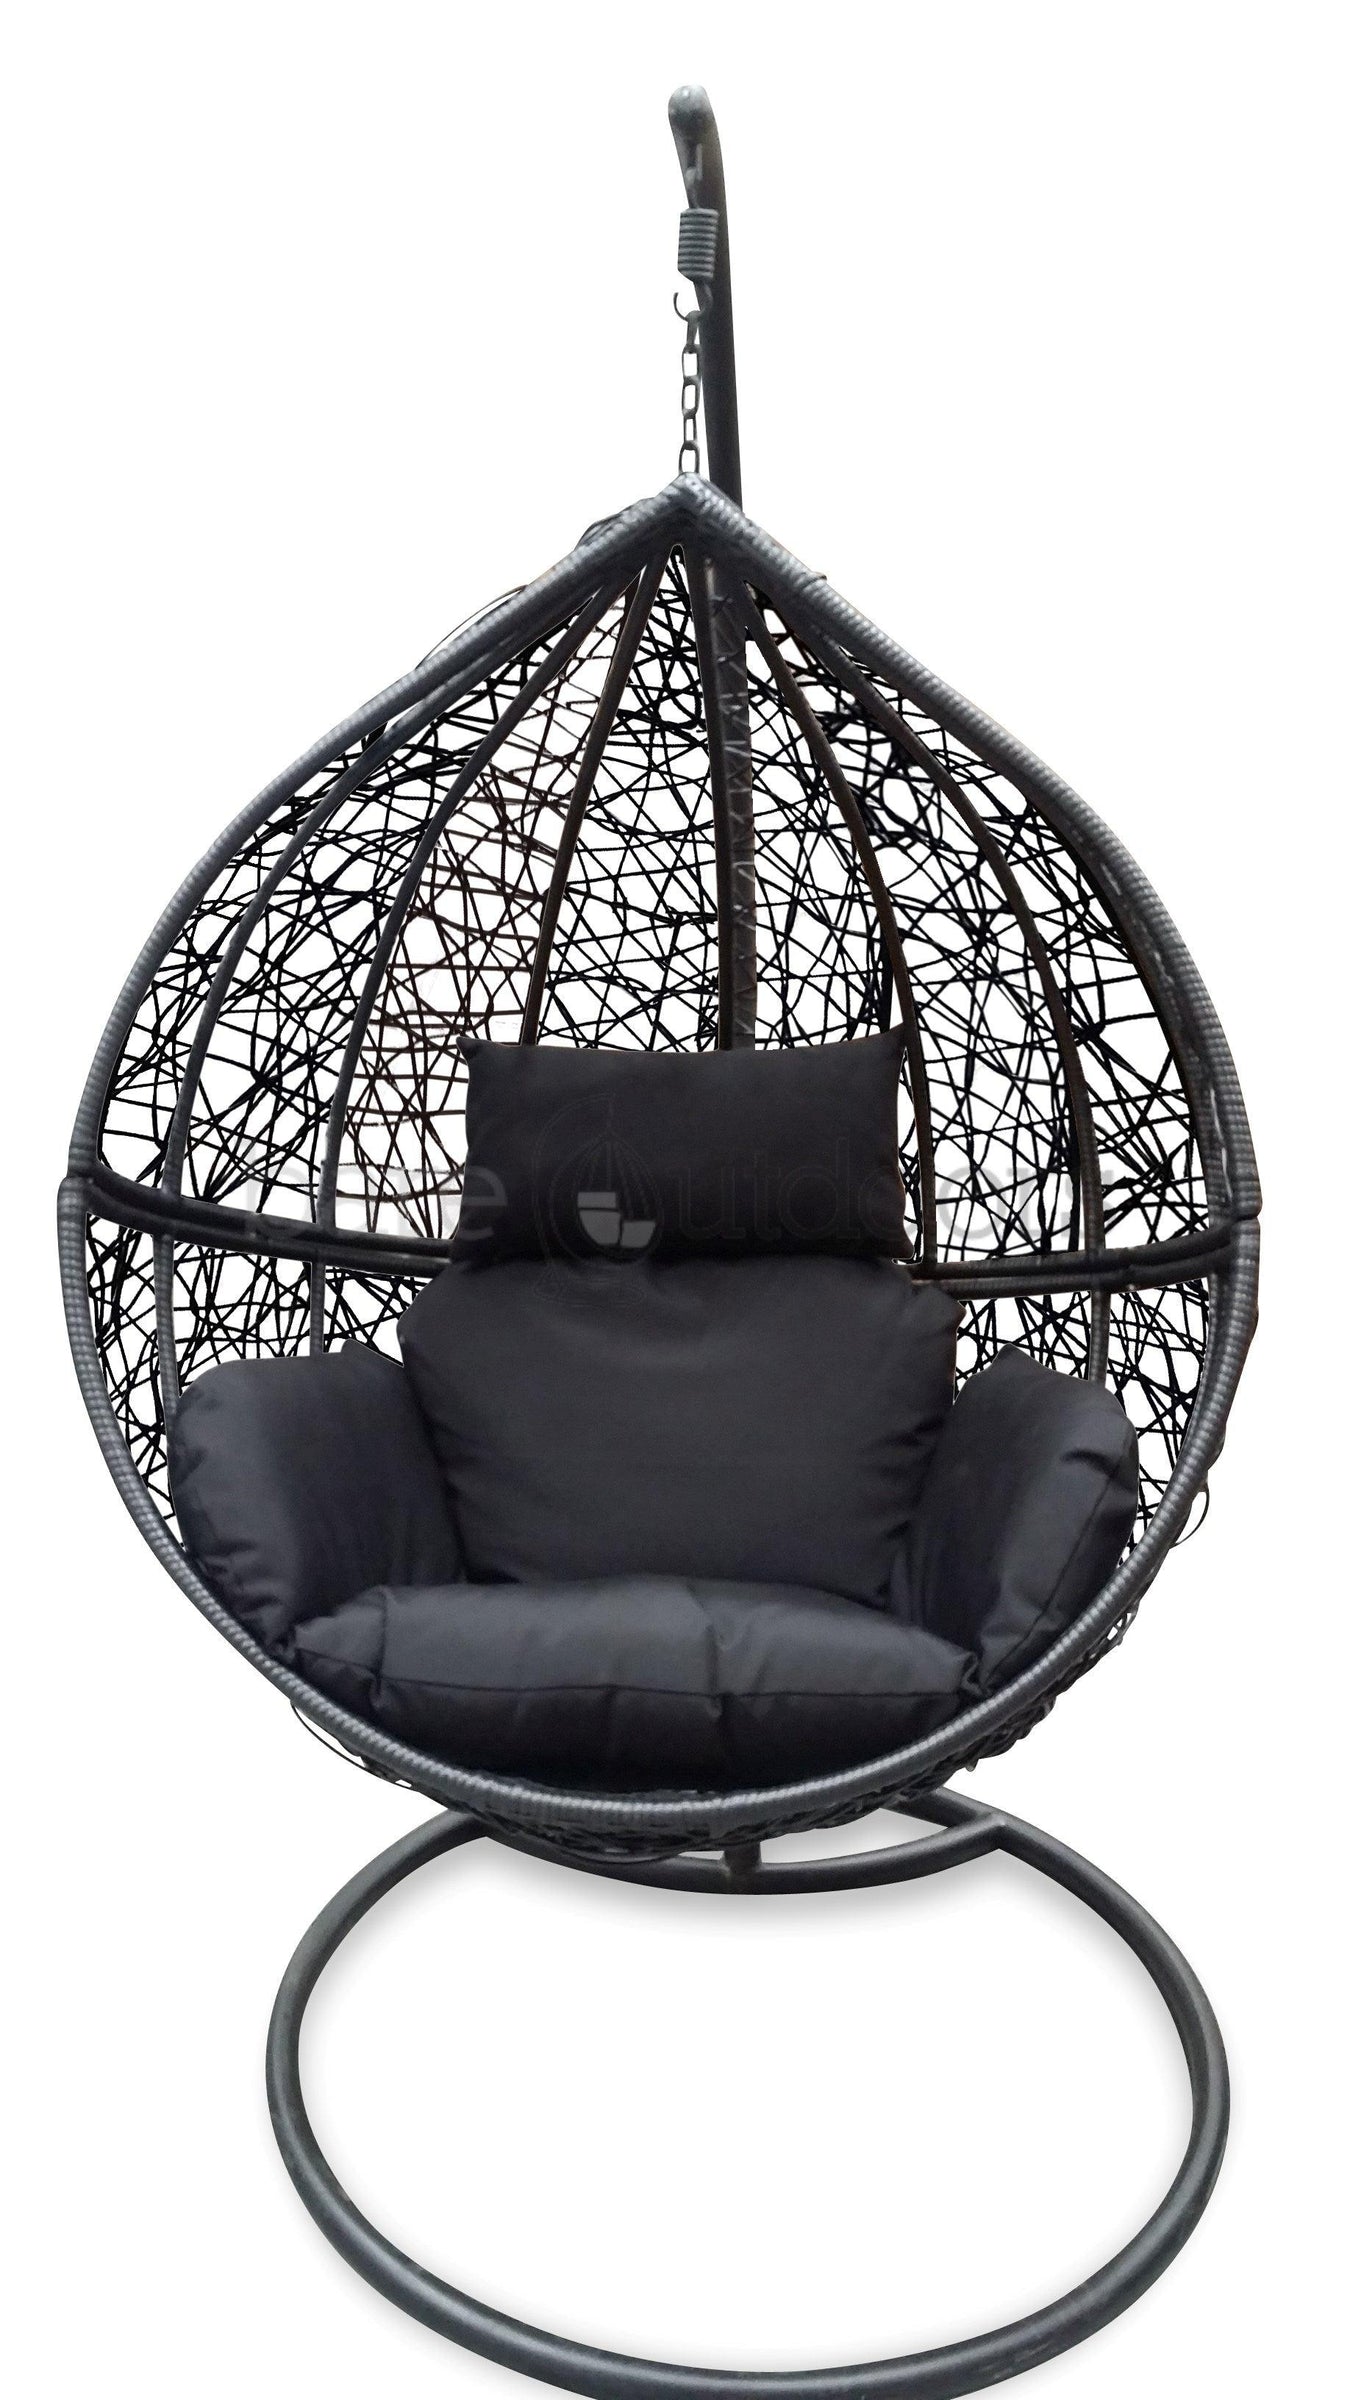 Hanging Egg Chairs